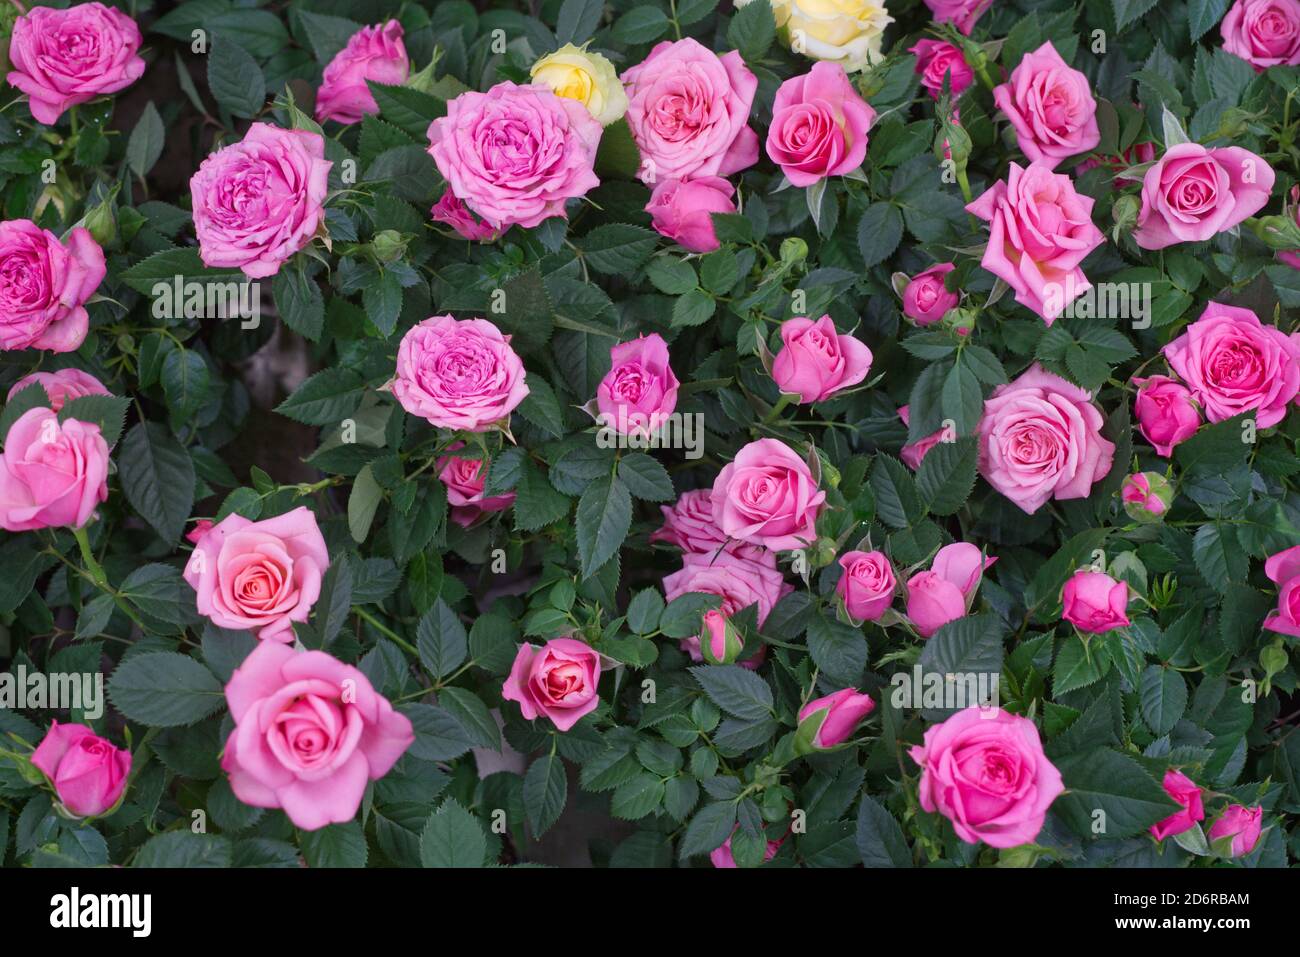 many pink and white roses in green leafs Stock Photo